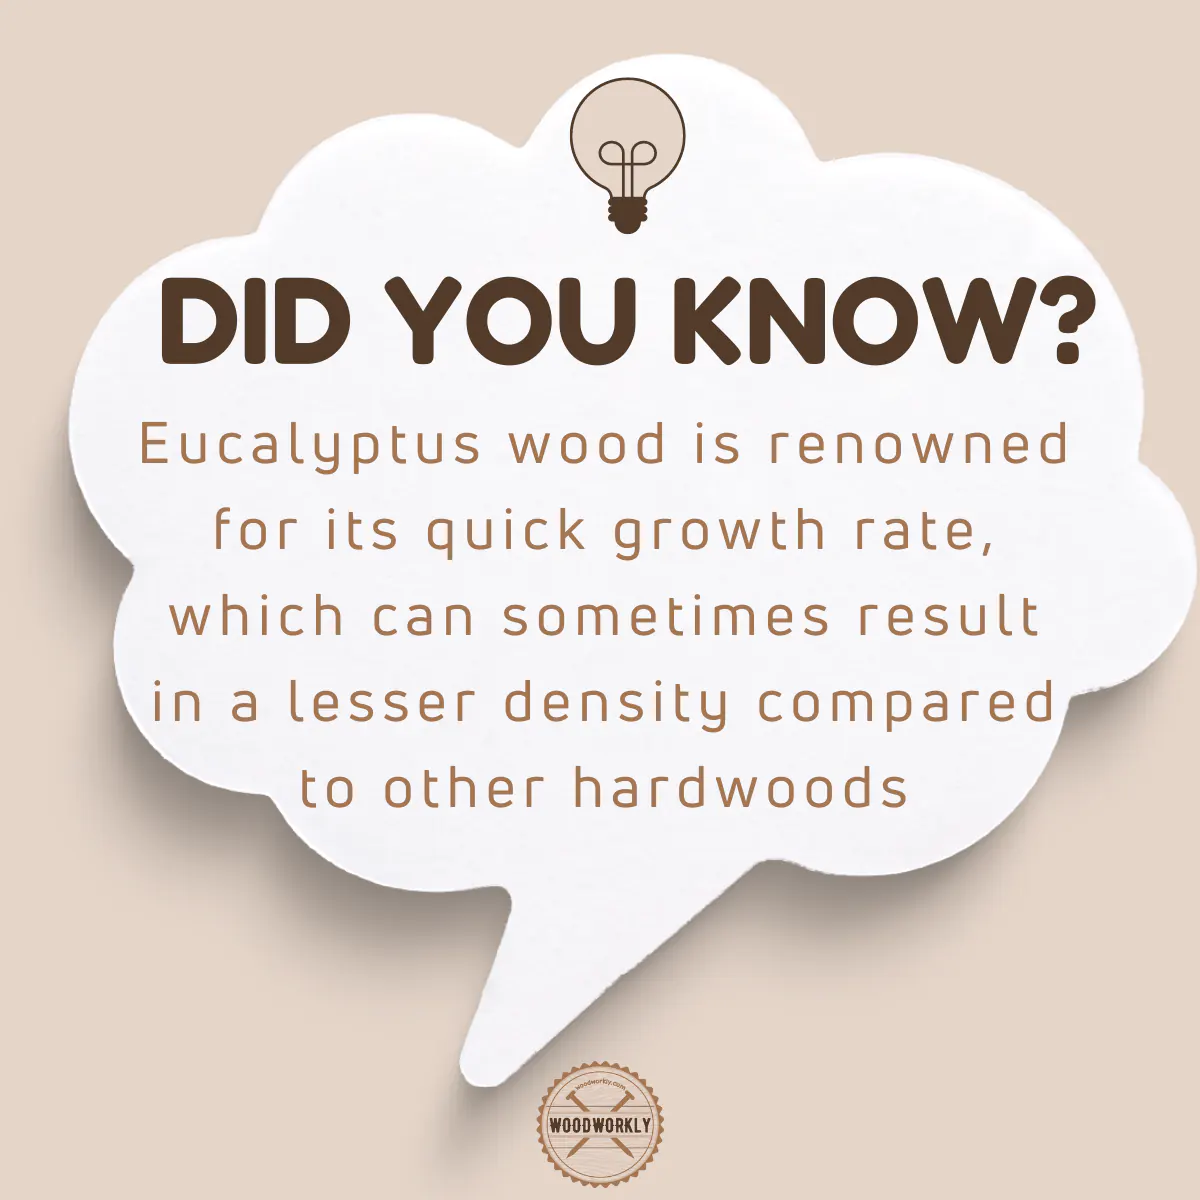 Did you know fact about Eucalyptus wood